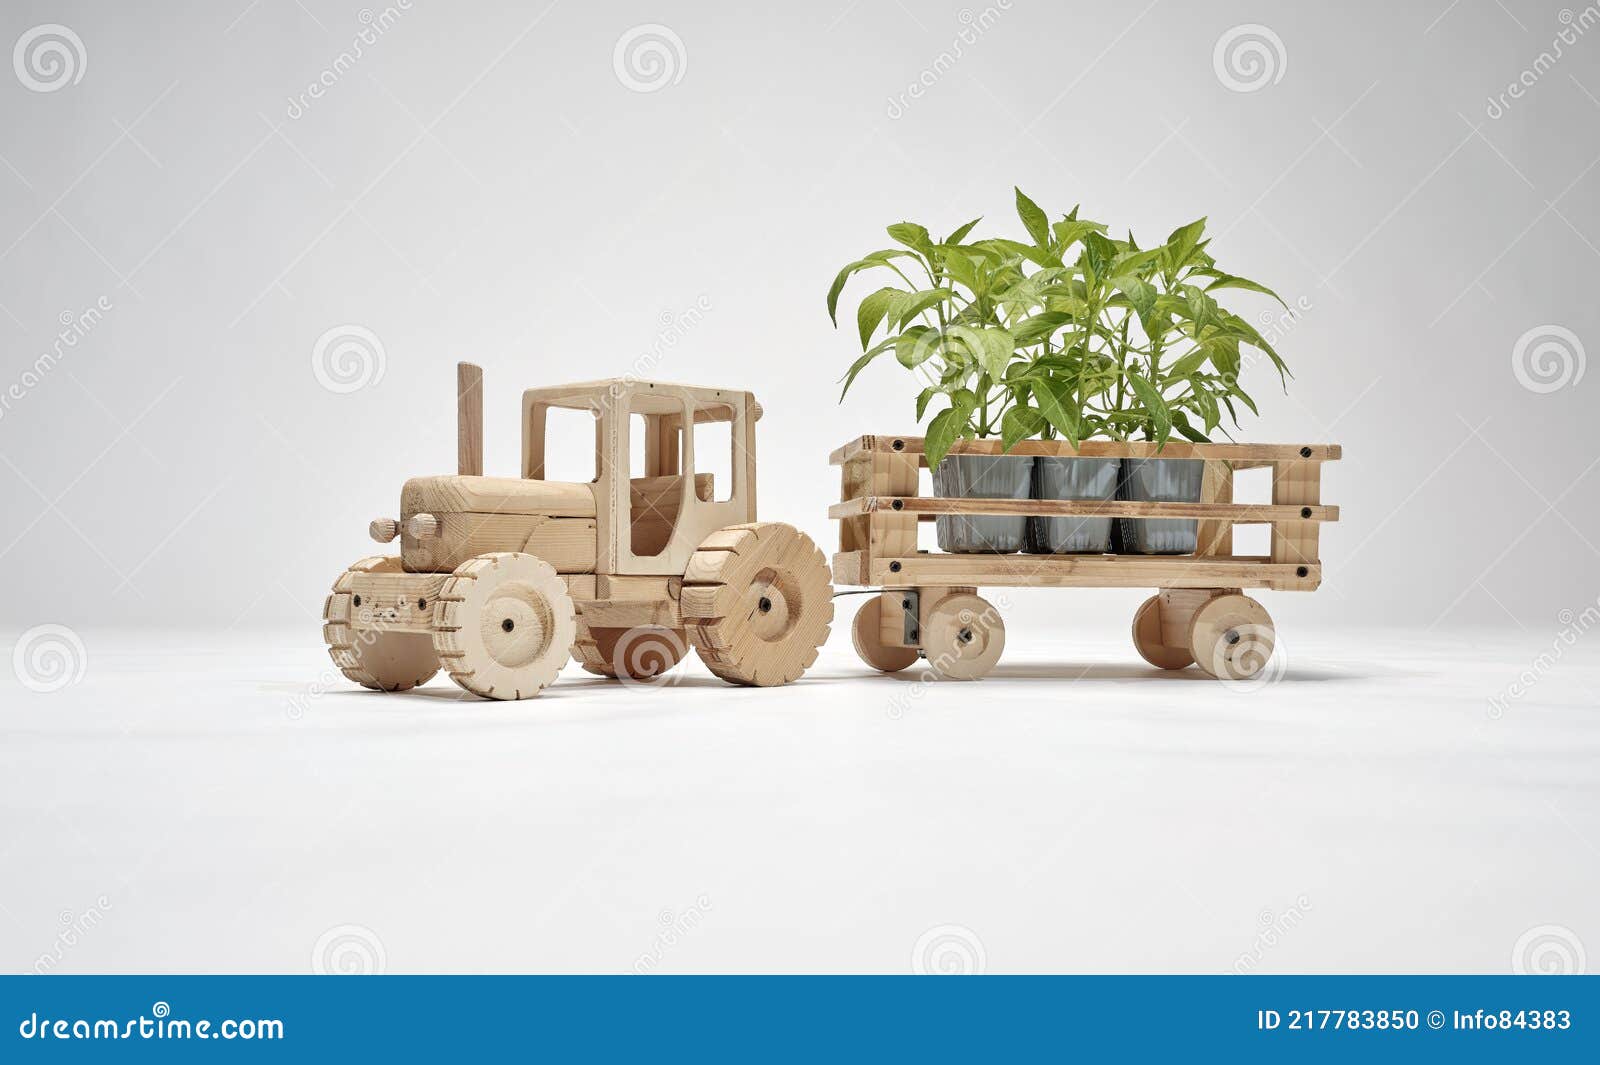 wooden tractor with trailer, transports small trees. concept of safeguarding nature and the environment and deforestation. concept